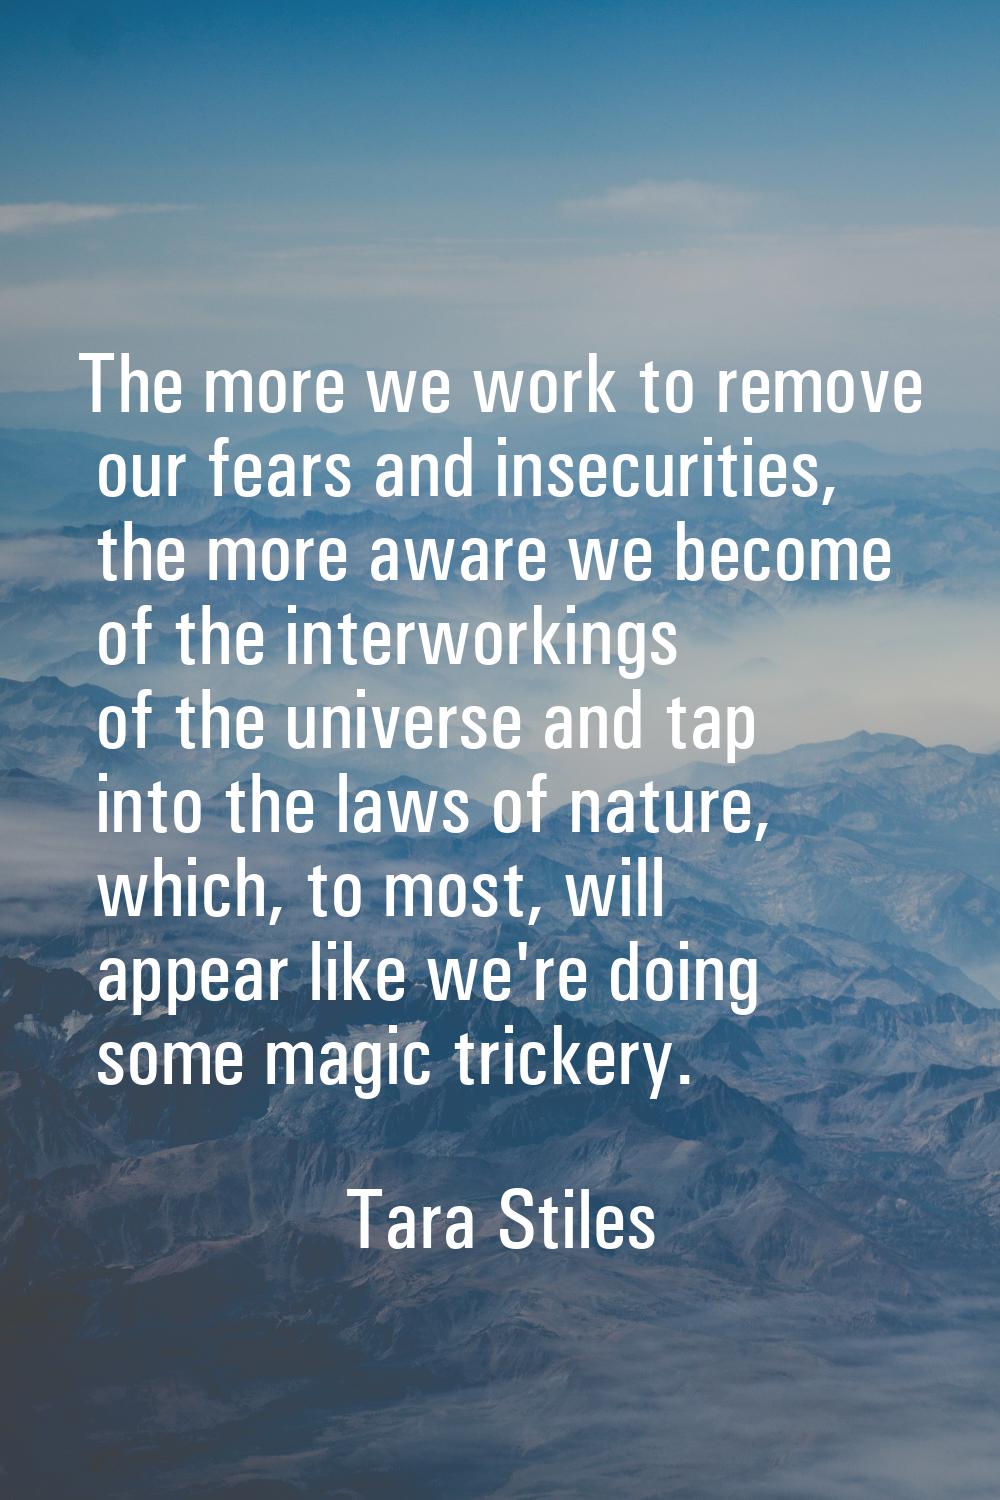 The more we work to remove our fears and insecurities, the more aware we become of the interworking